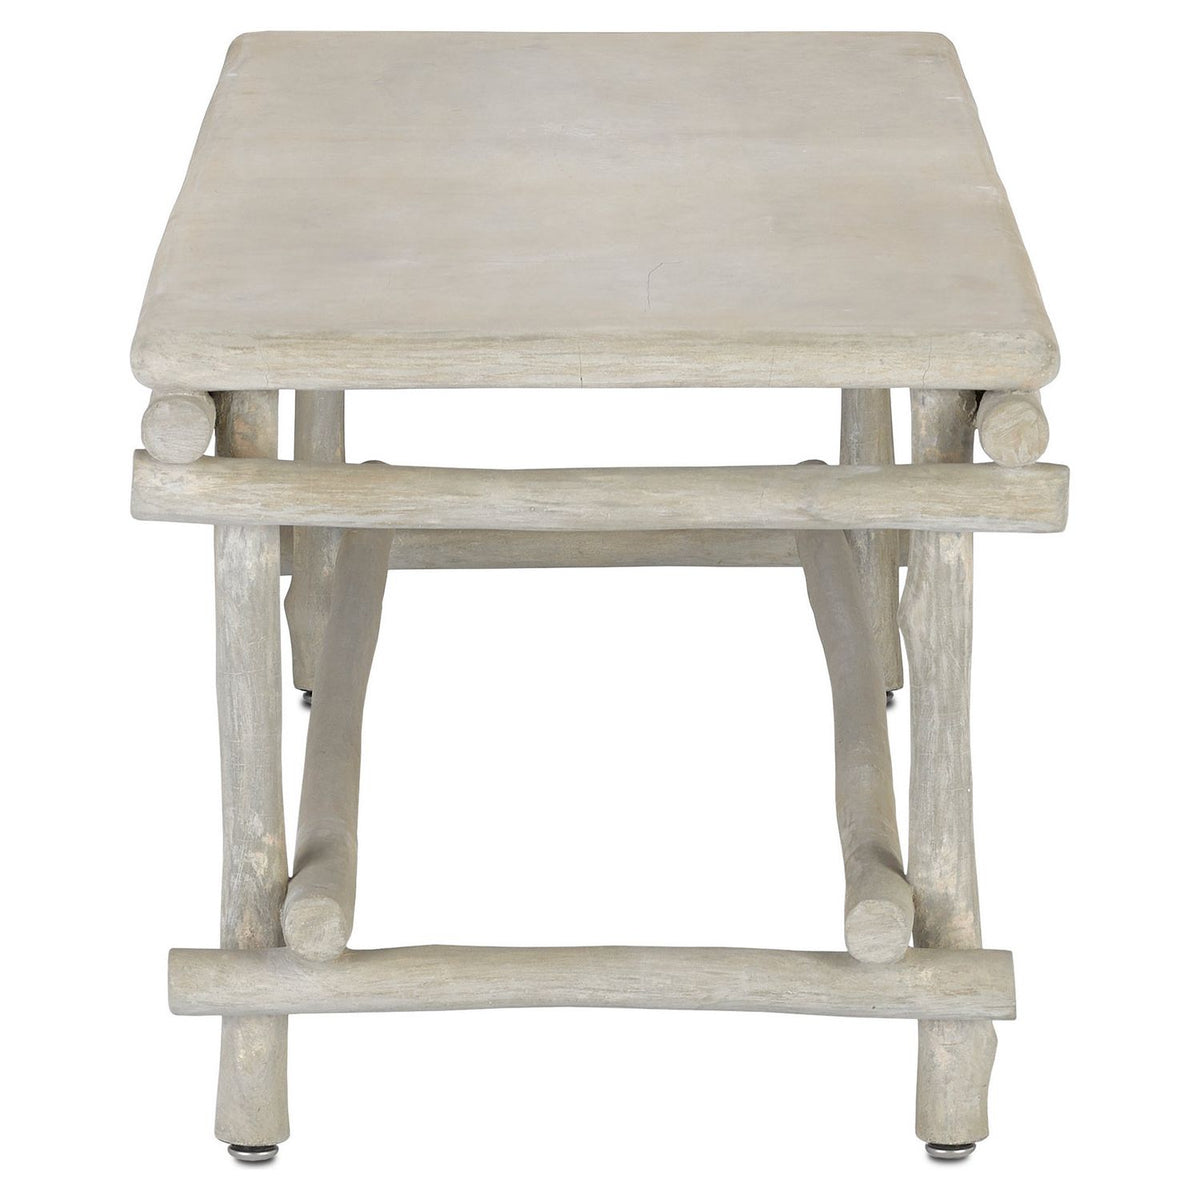 Luzon Table/Bench